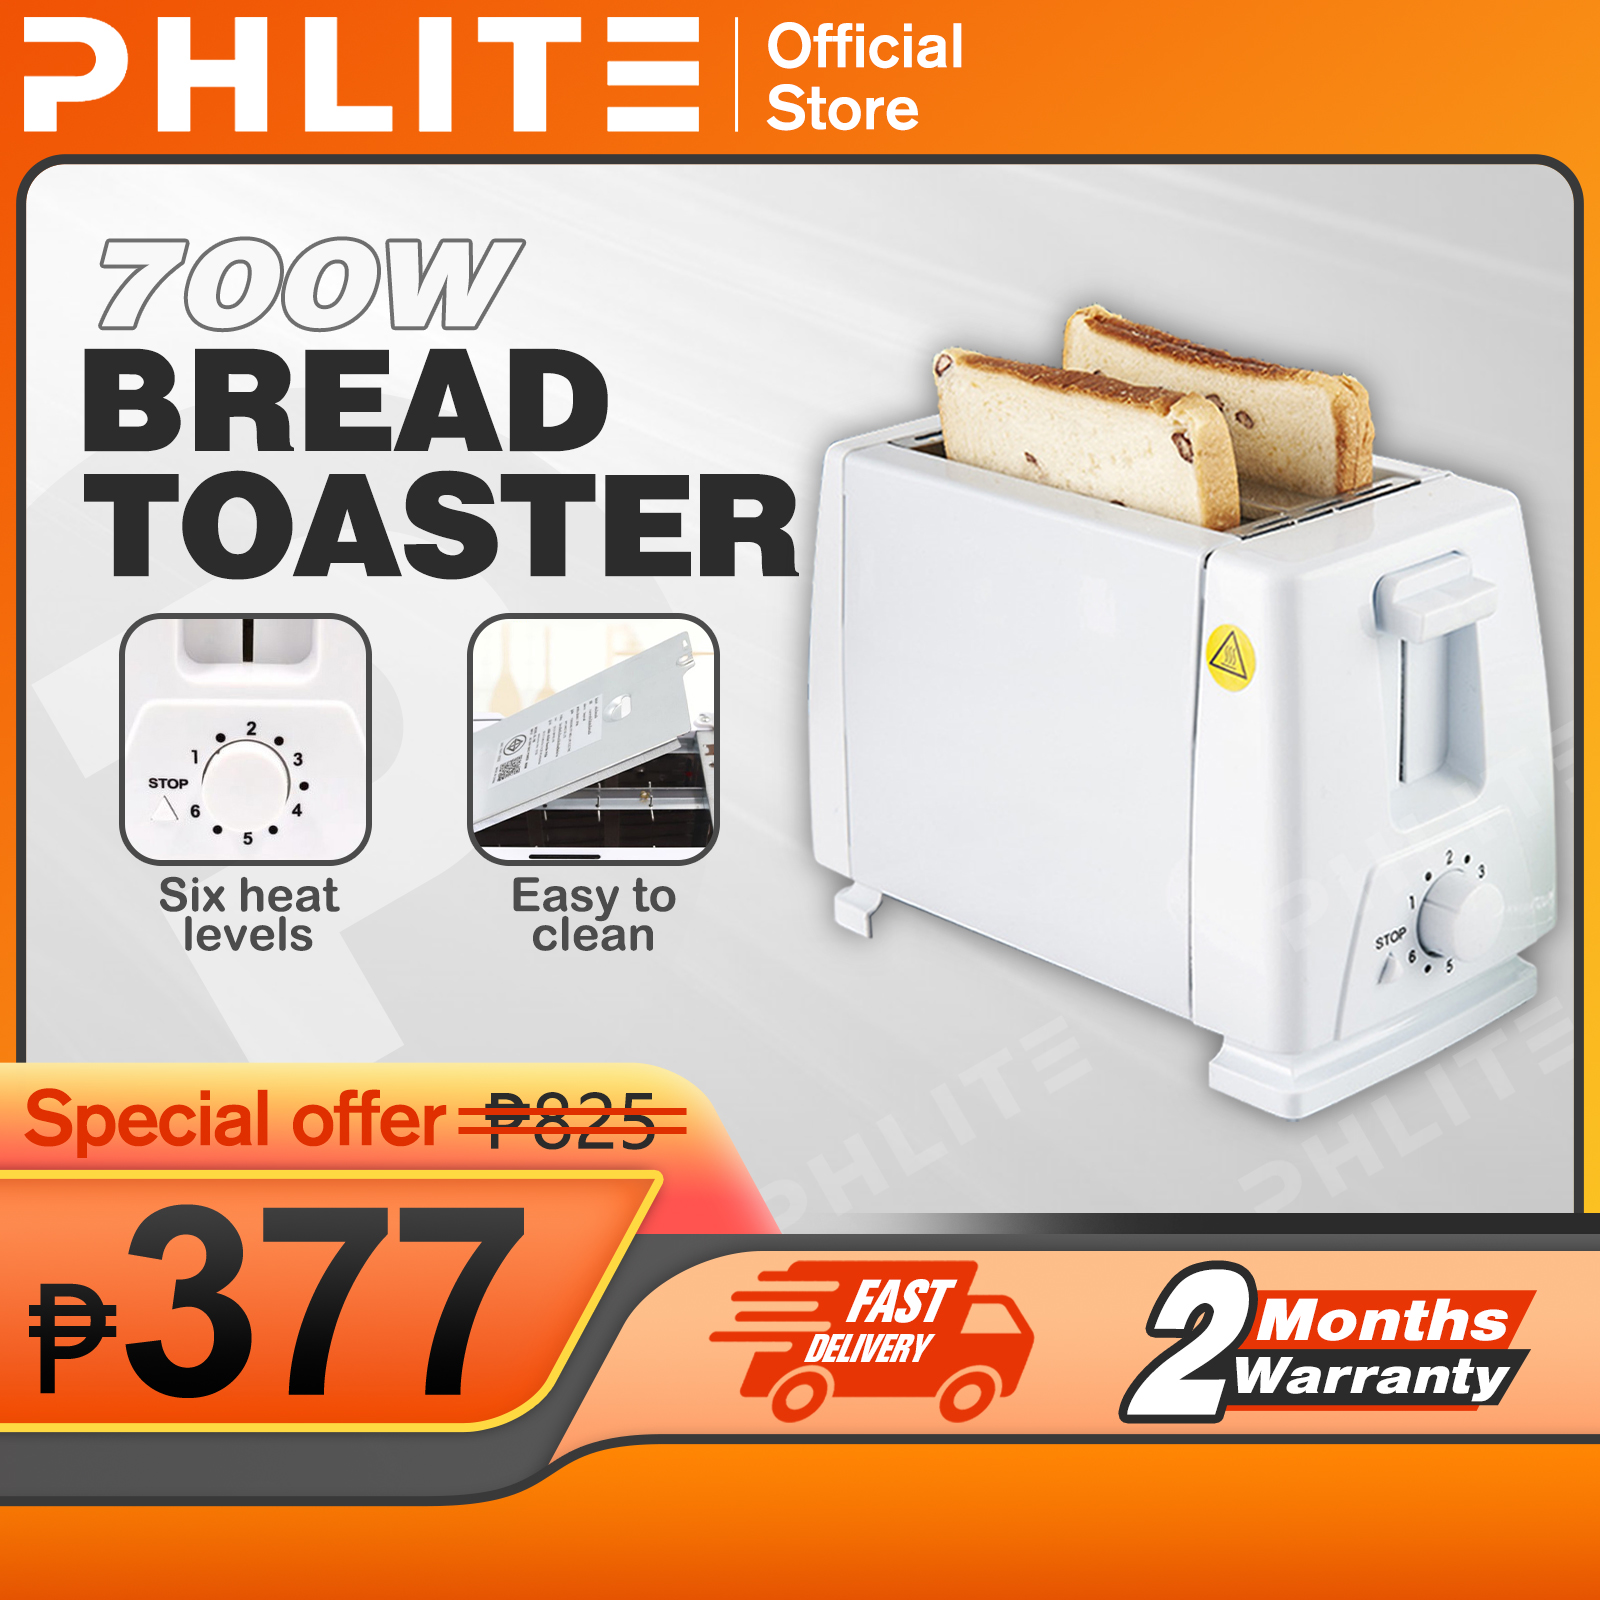 PHLife Stainless Steel Bread Toaster - On Sale